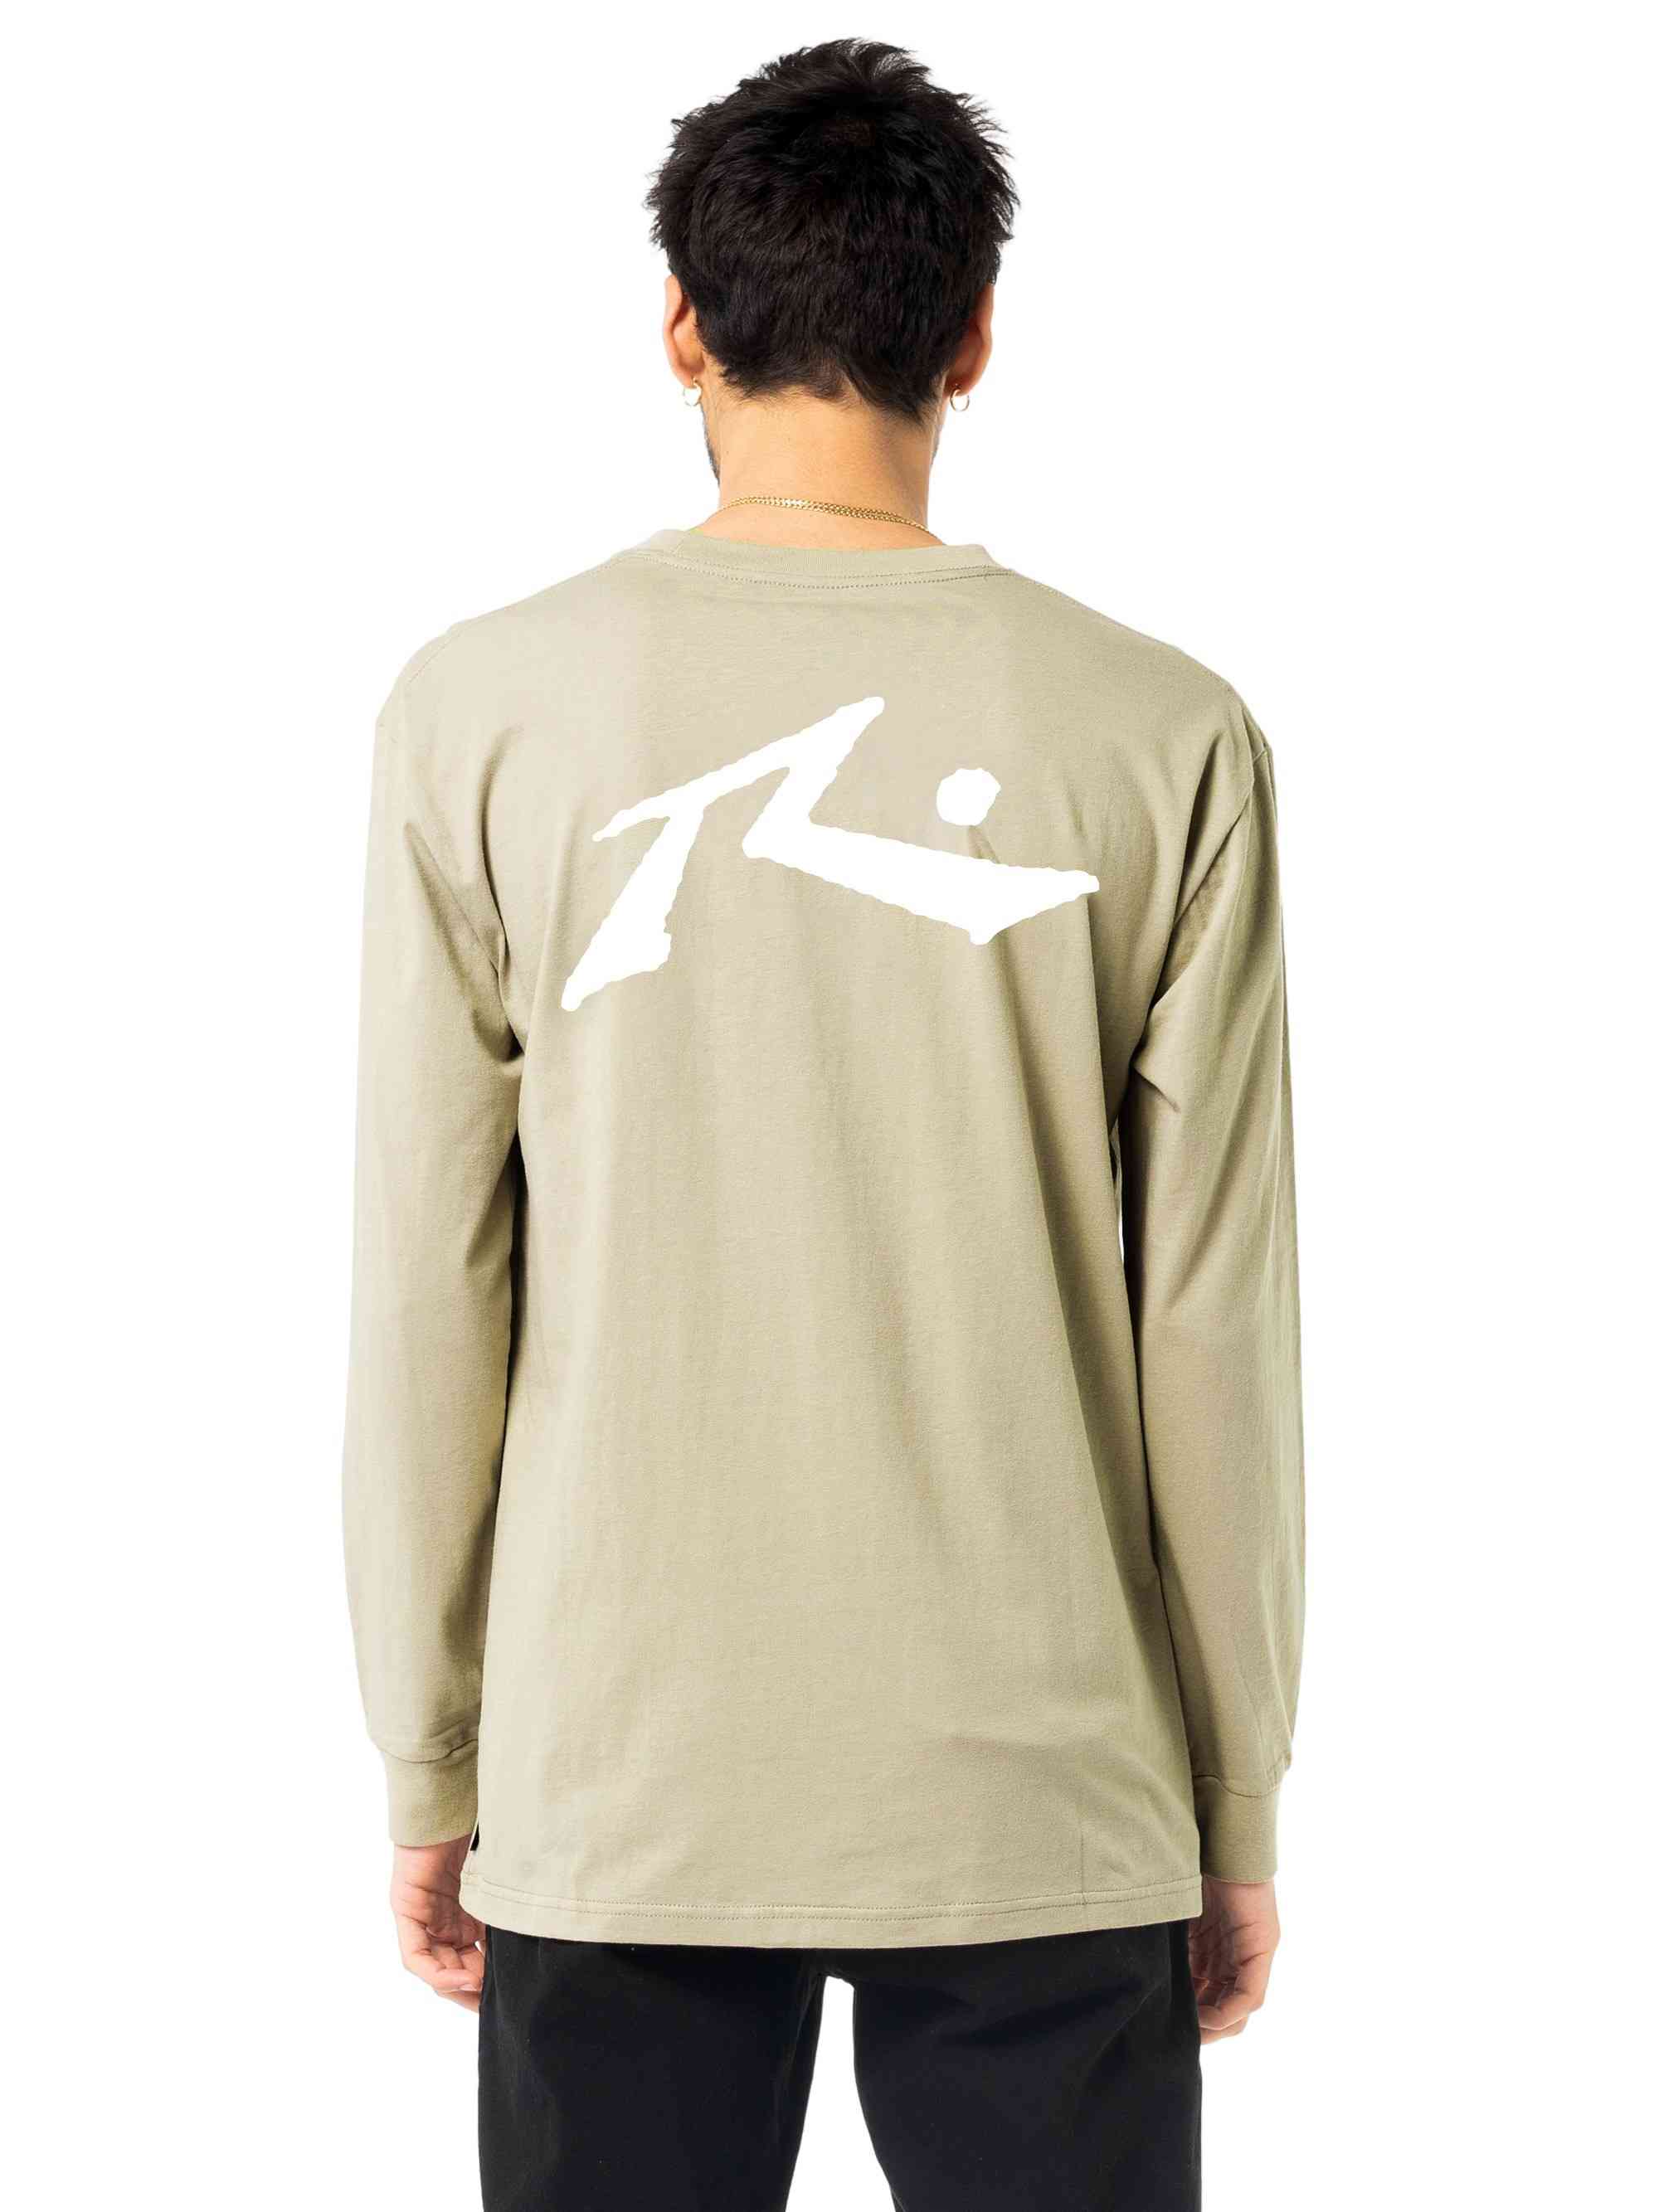 Rusty Competition Long Sleeve Tee - Covert Green Rusty Australia, L / Covert Green